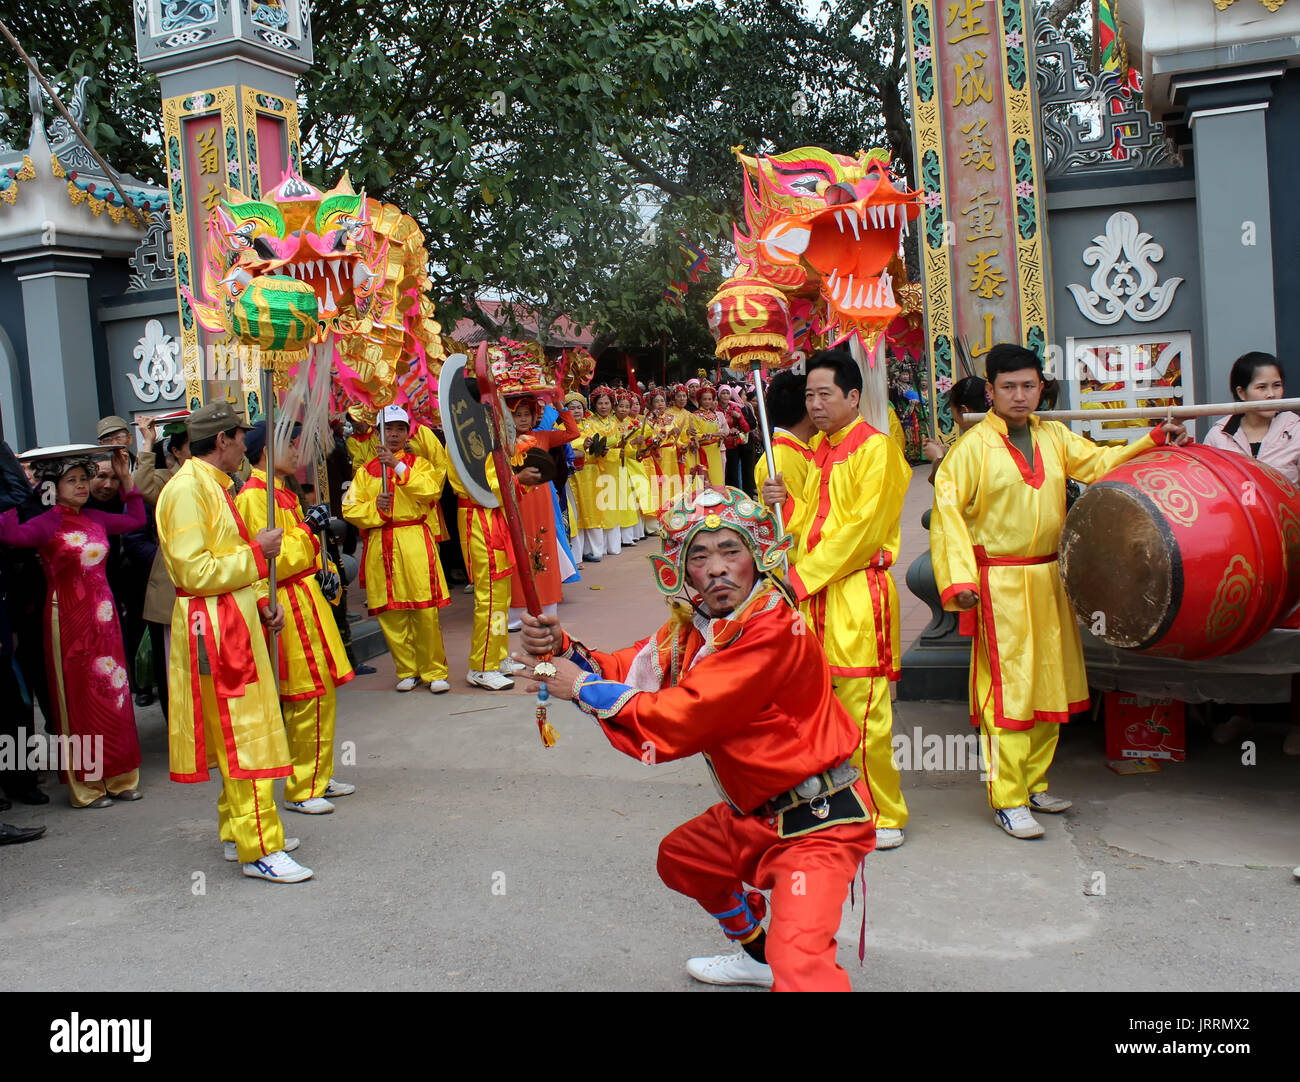 HAI DUONG, VIETNAM, March, 4: Group of people performance dragon dance at Cao temple festival on March, 4, 2013 in Hai Duong, Vietnam. Dragon dance is Stock Photo